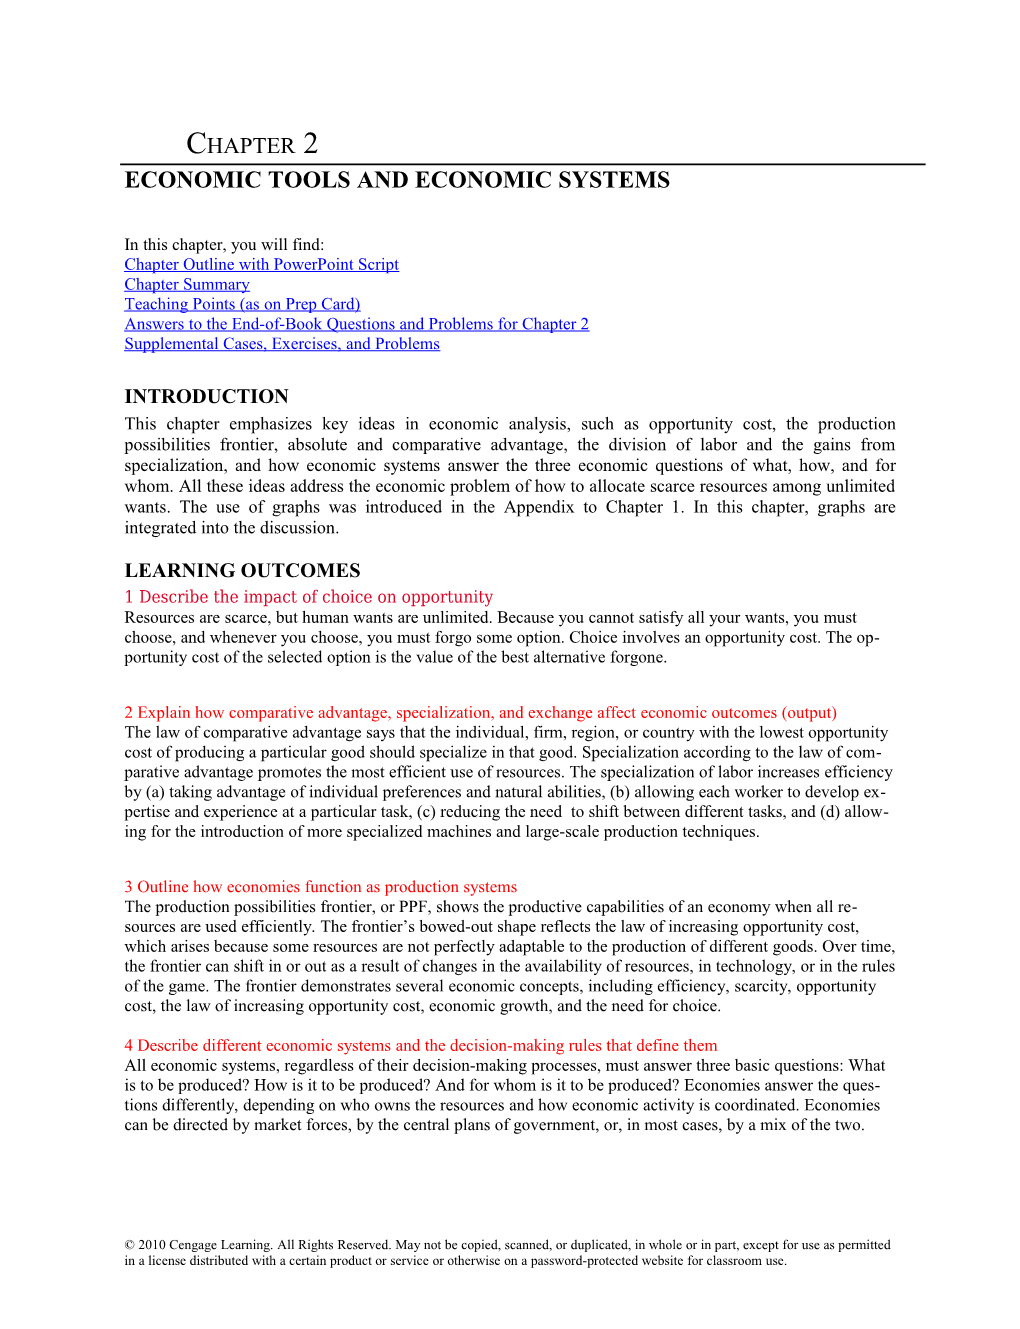 Chapter 2 Economic Tools and Economic Systems1